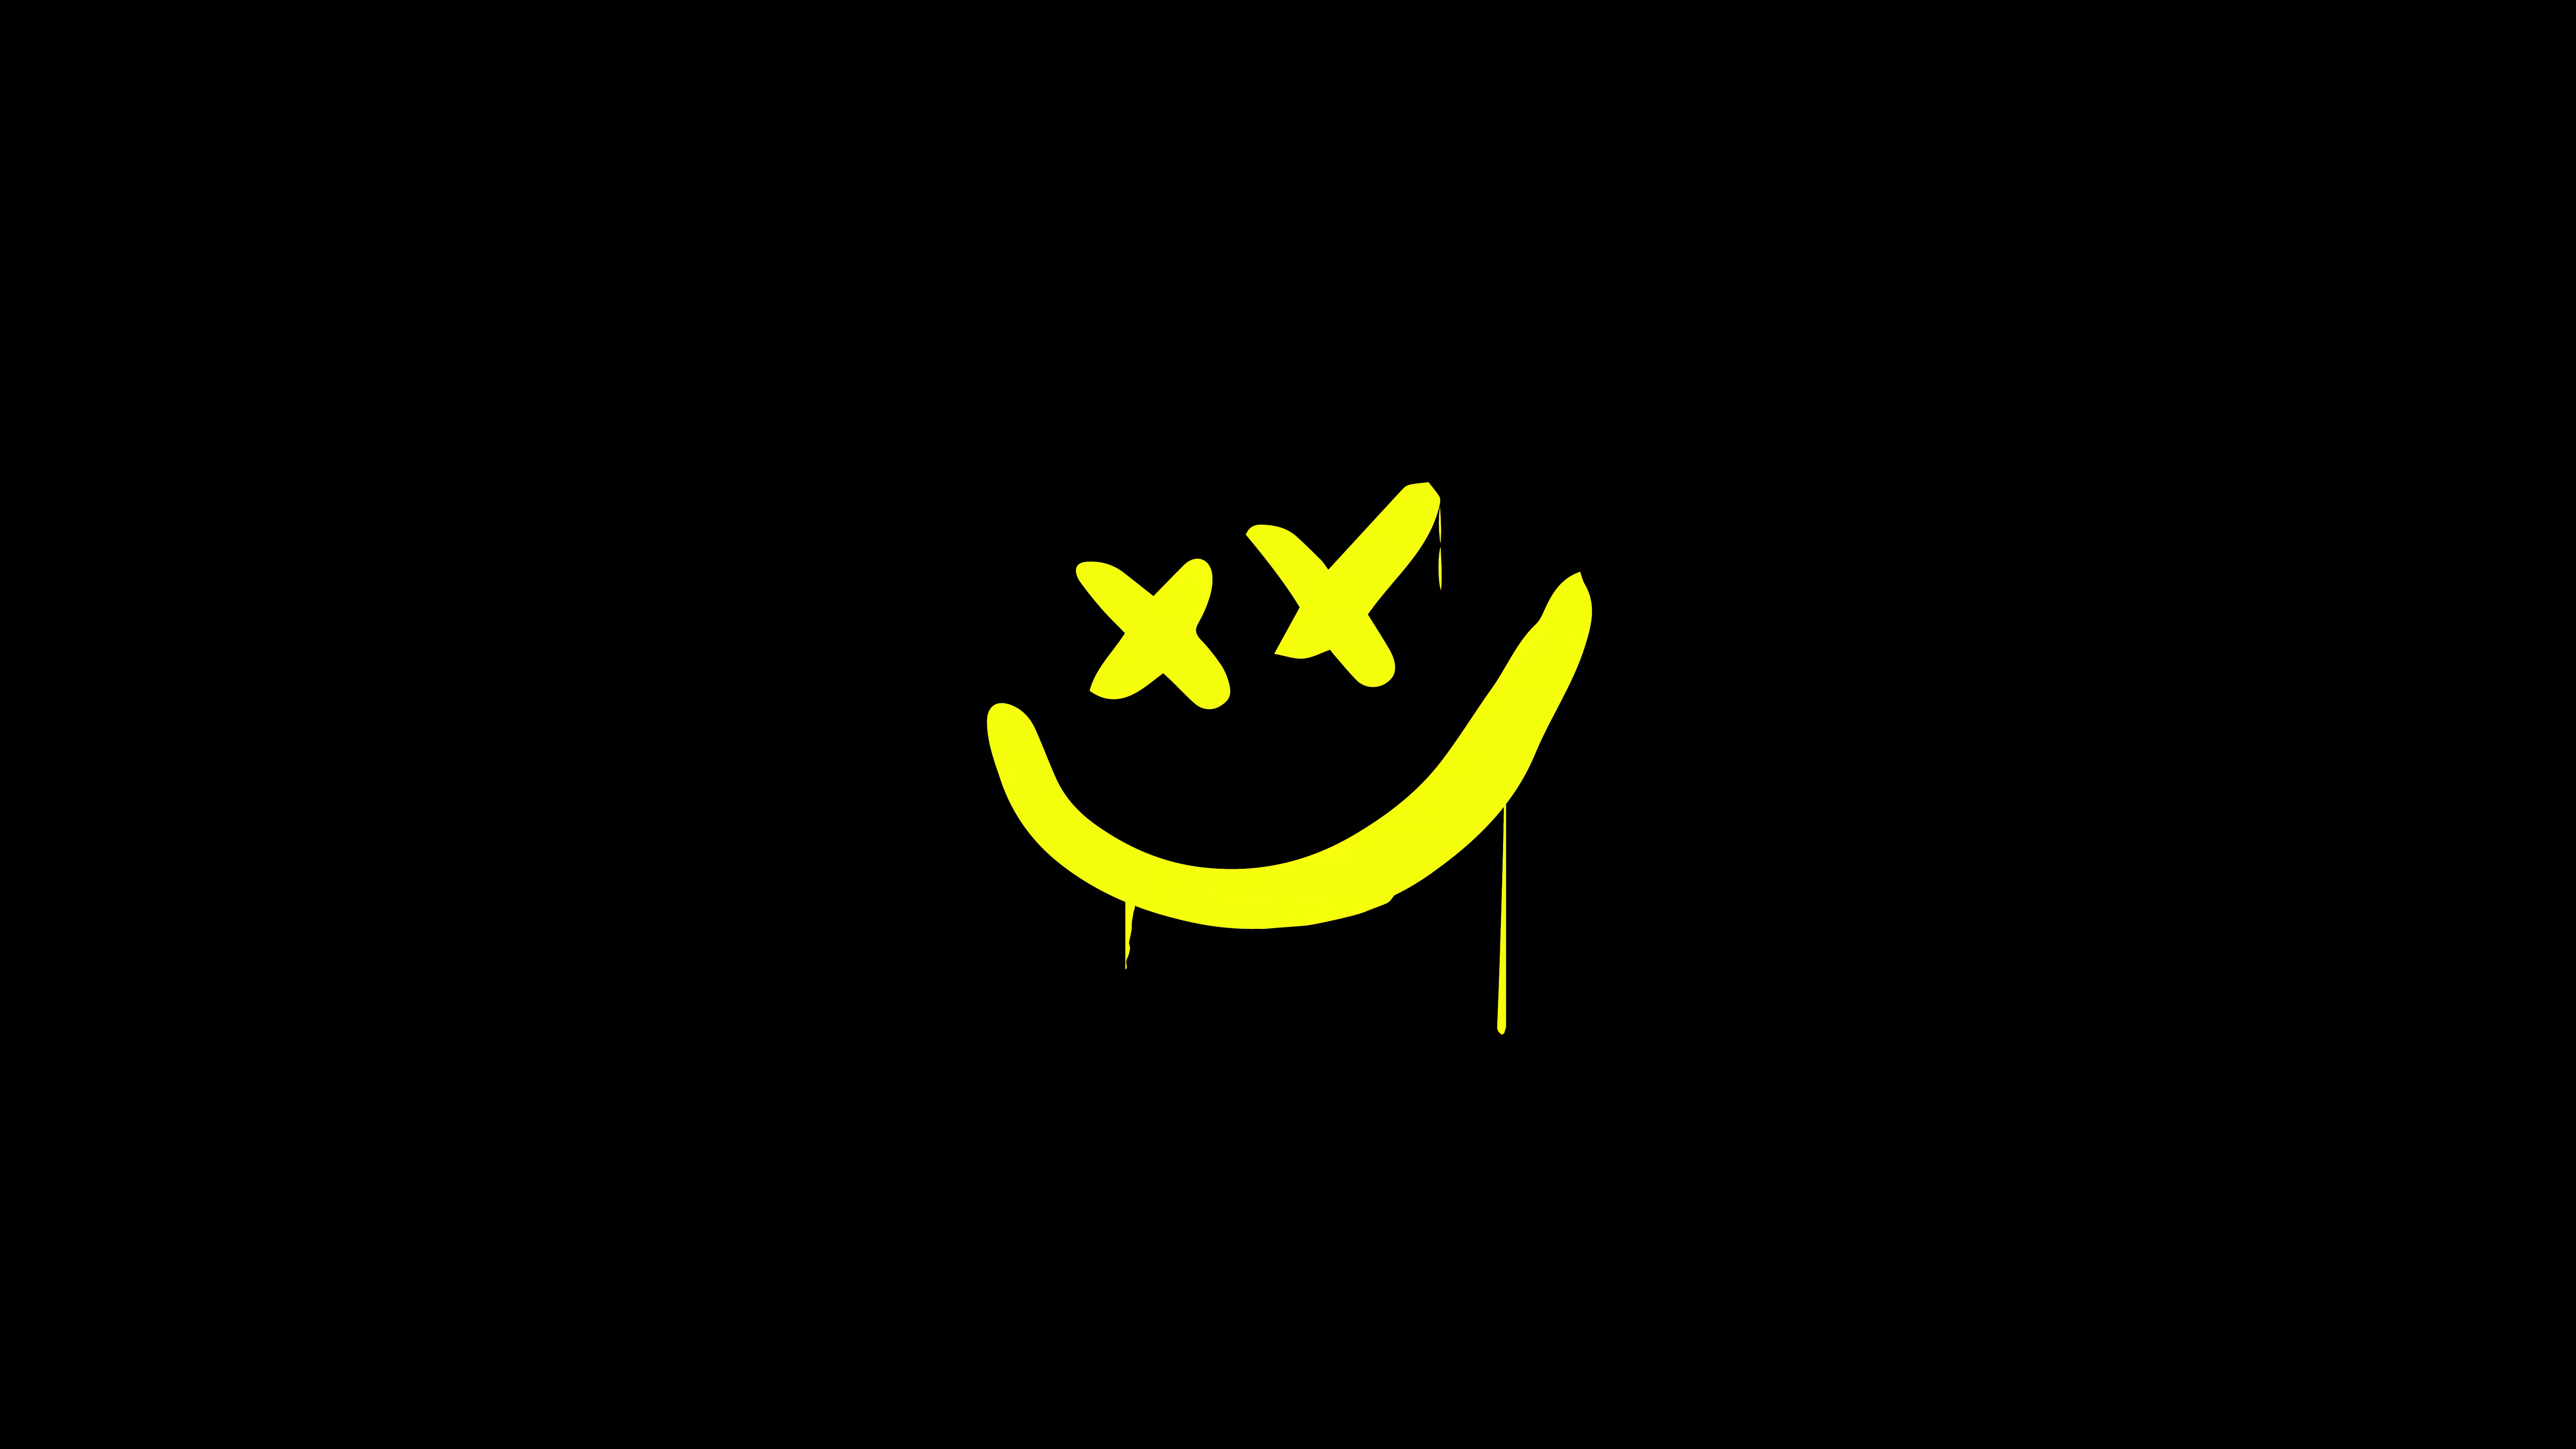 HD wallpaper, 8K, Yellow Smiley, Drippy Smiley, Black Background, Simple, 5K